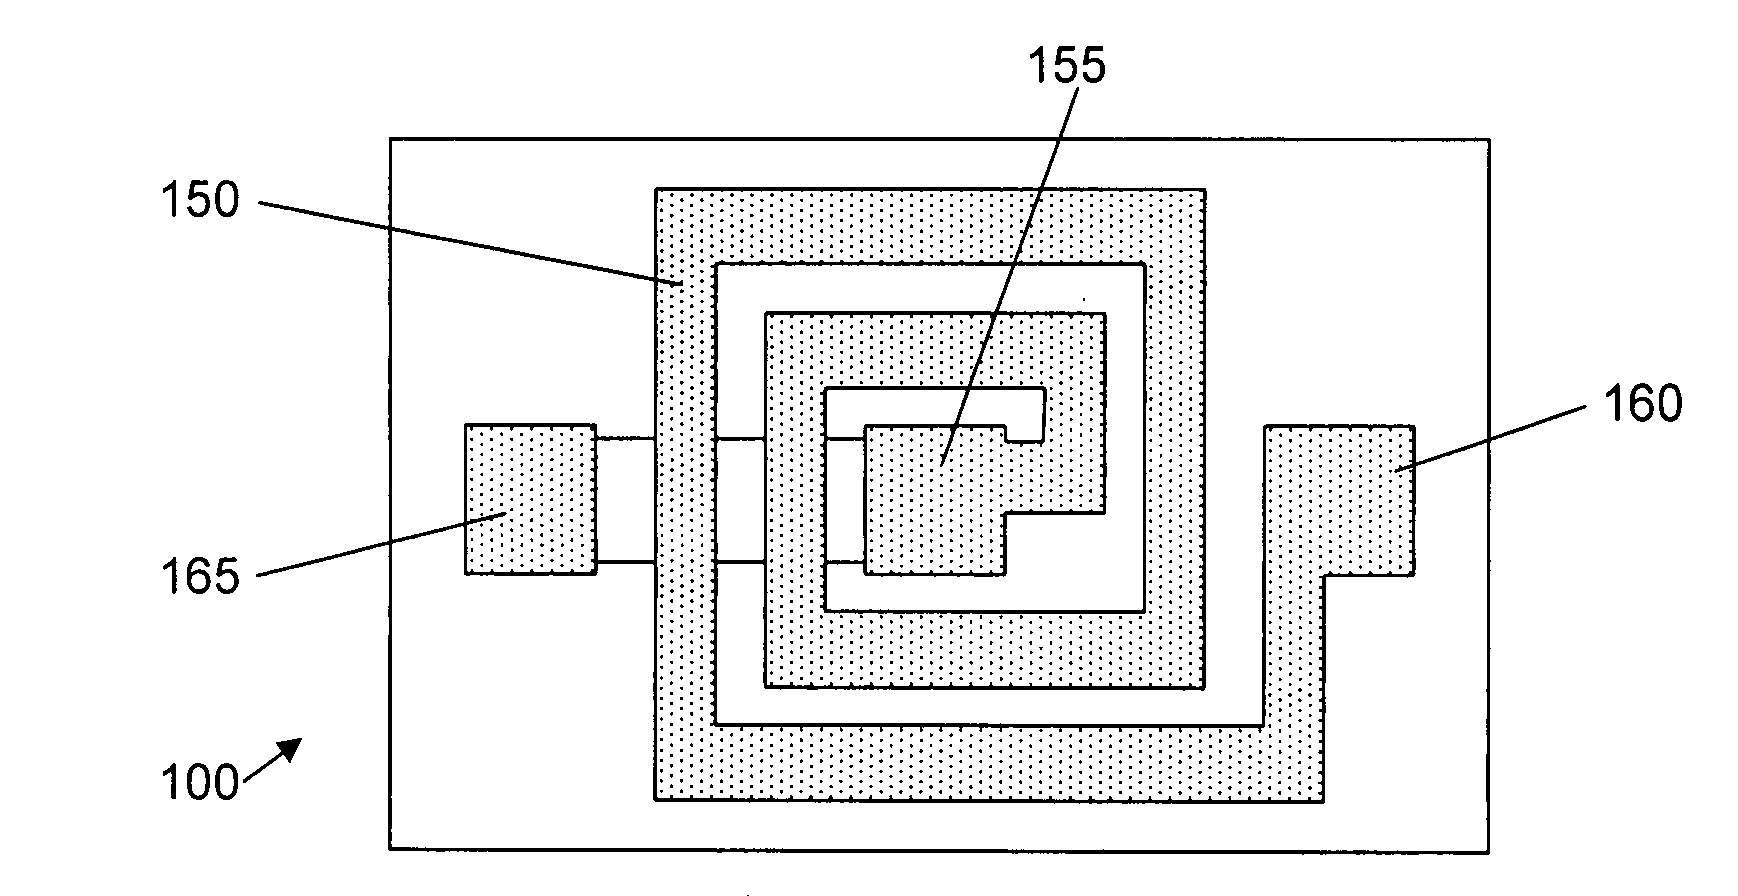 Chip scale power converter package having an inductor substrate